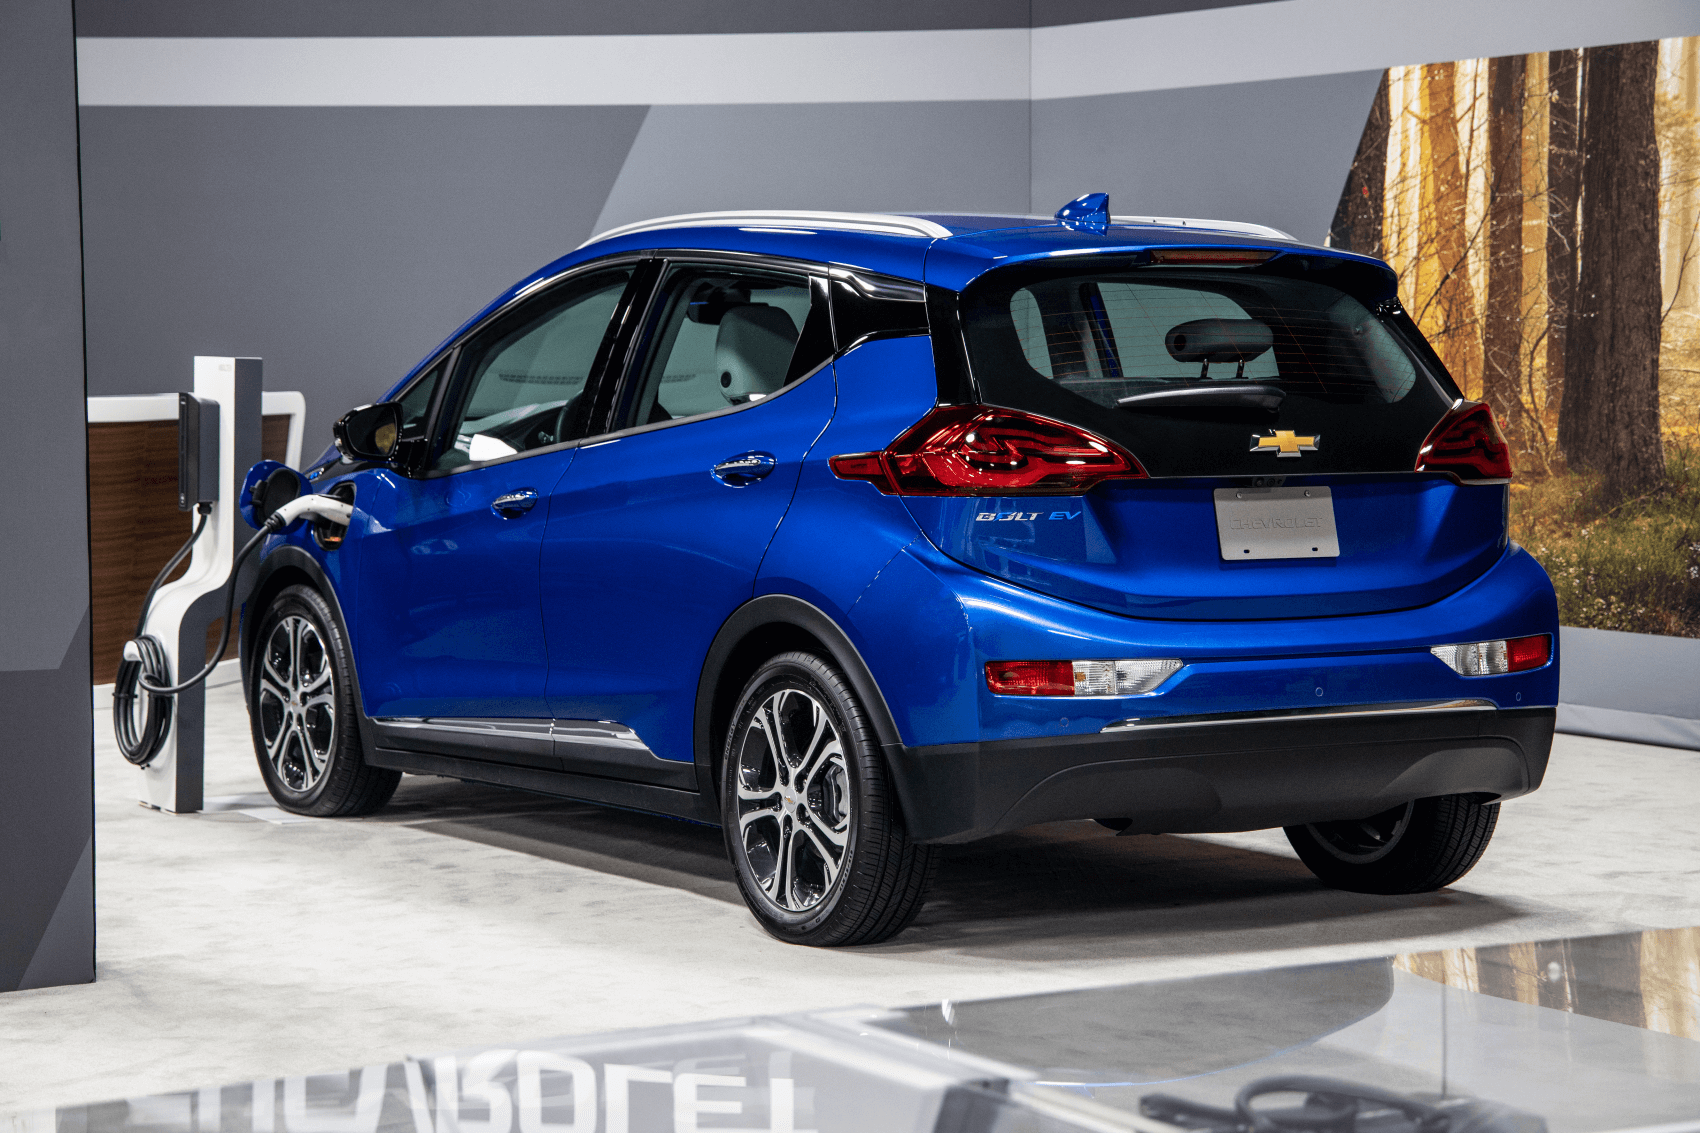 Chevy Bolt Lease Deals near Columbus OH Mark Wahlberg Chevy of Columbus